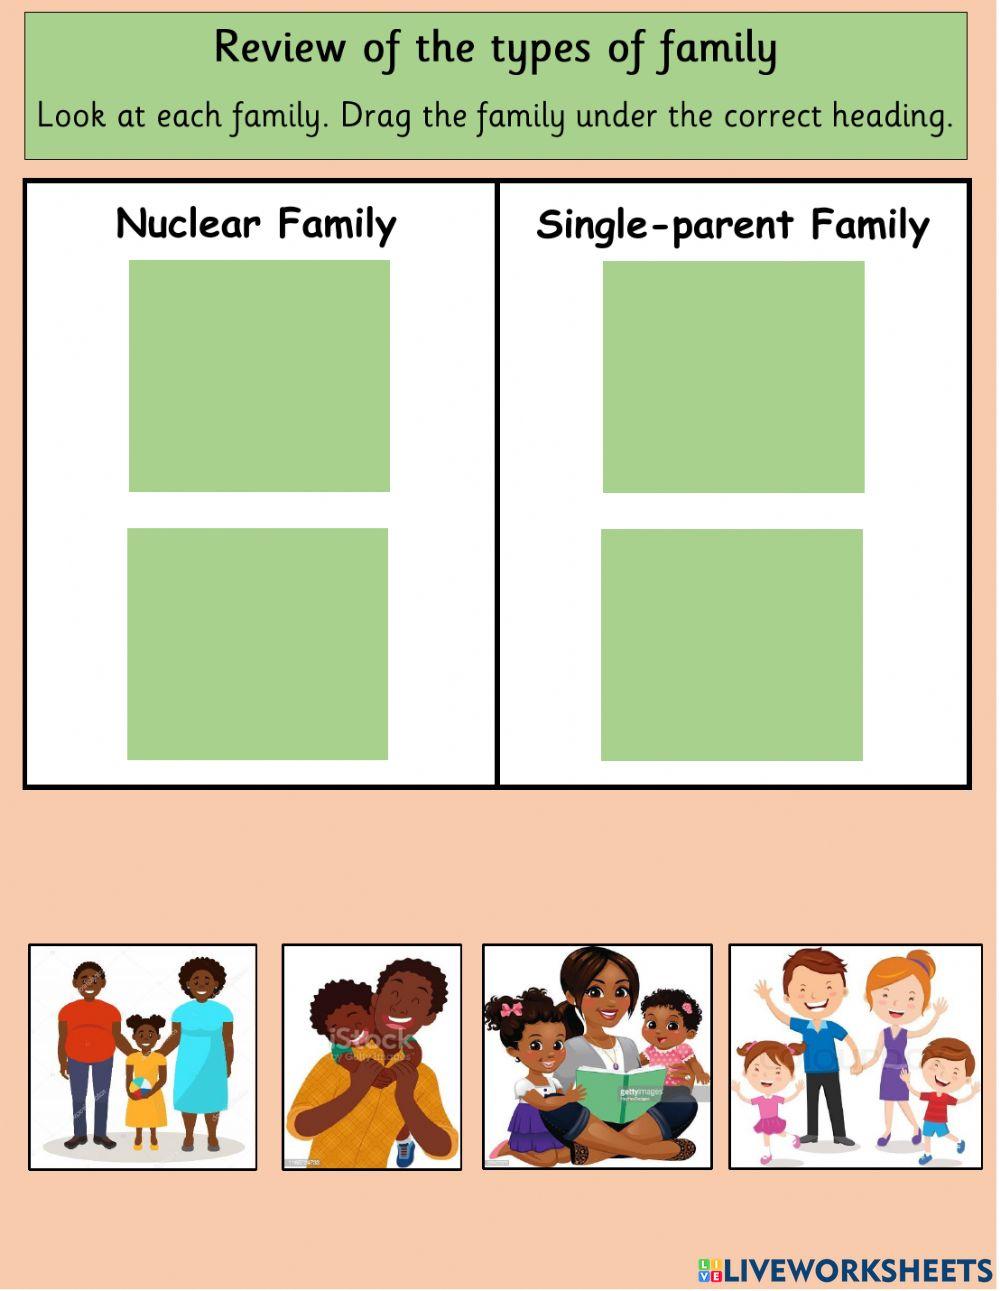 Review of the types of family